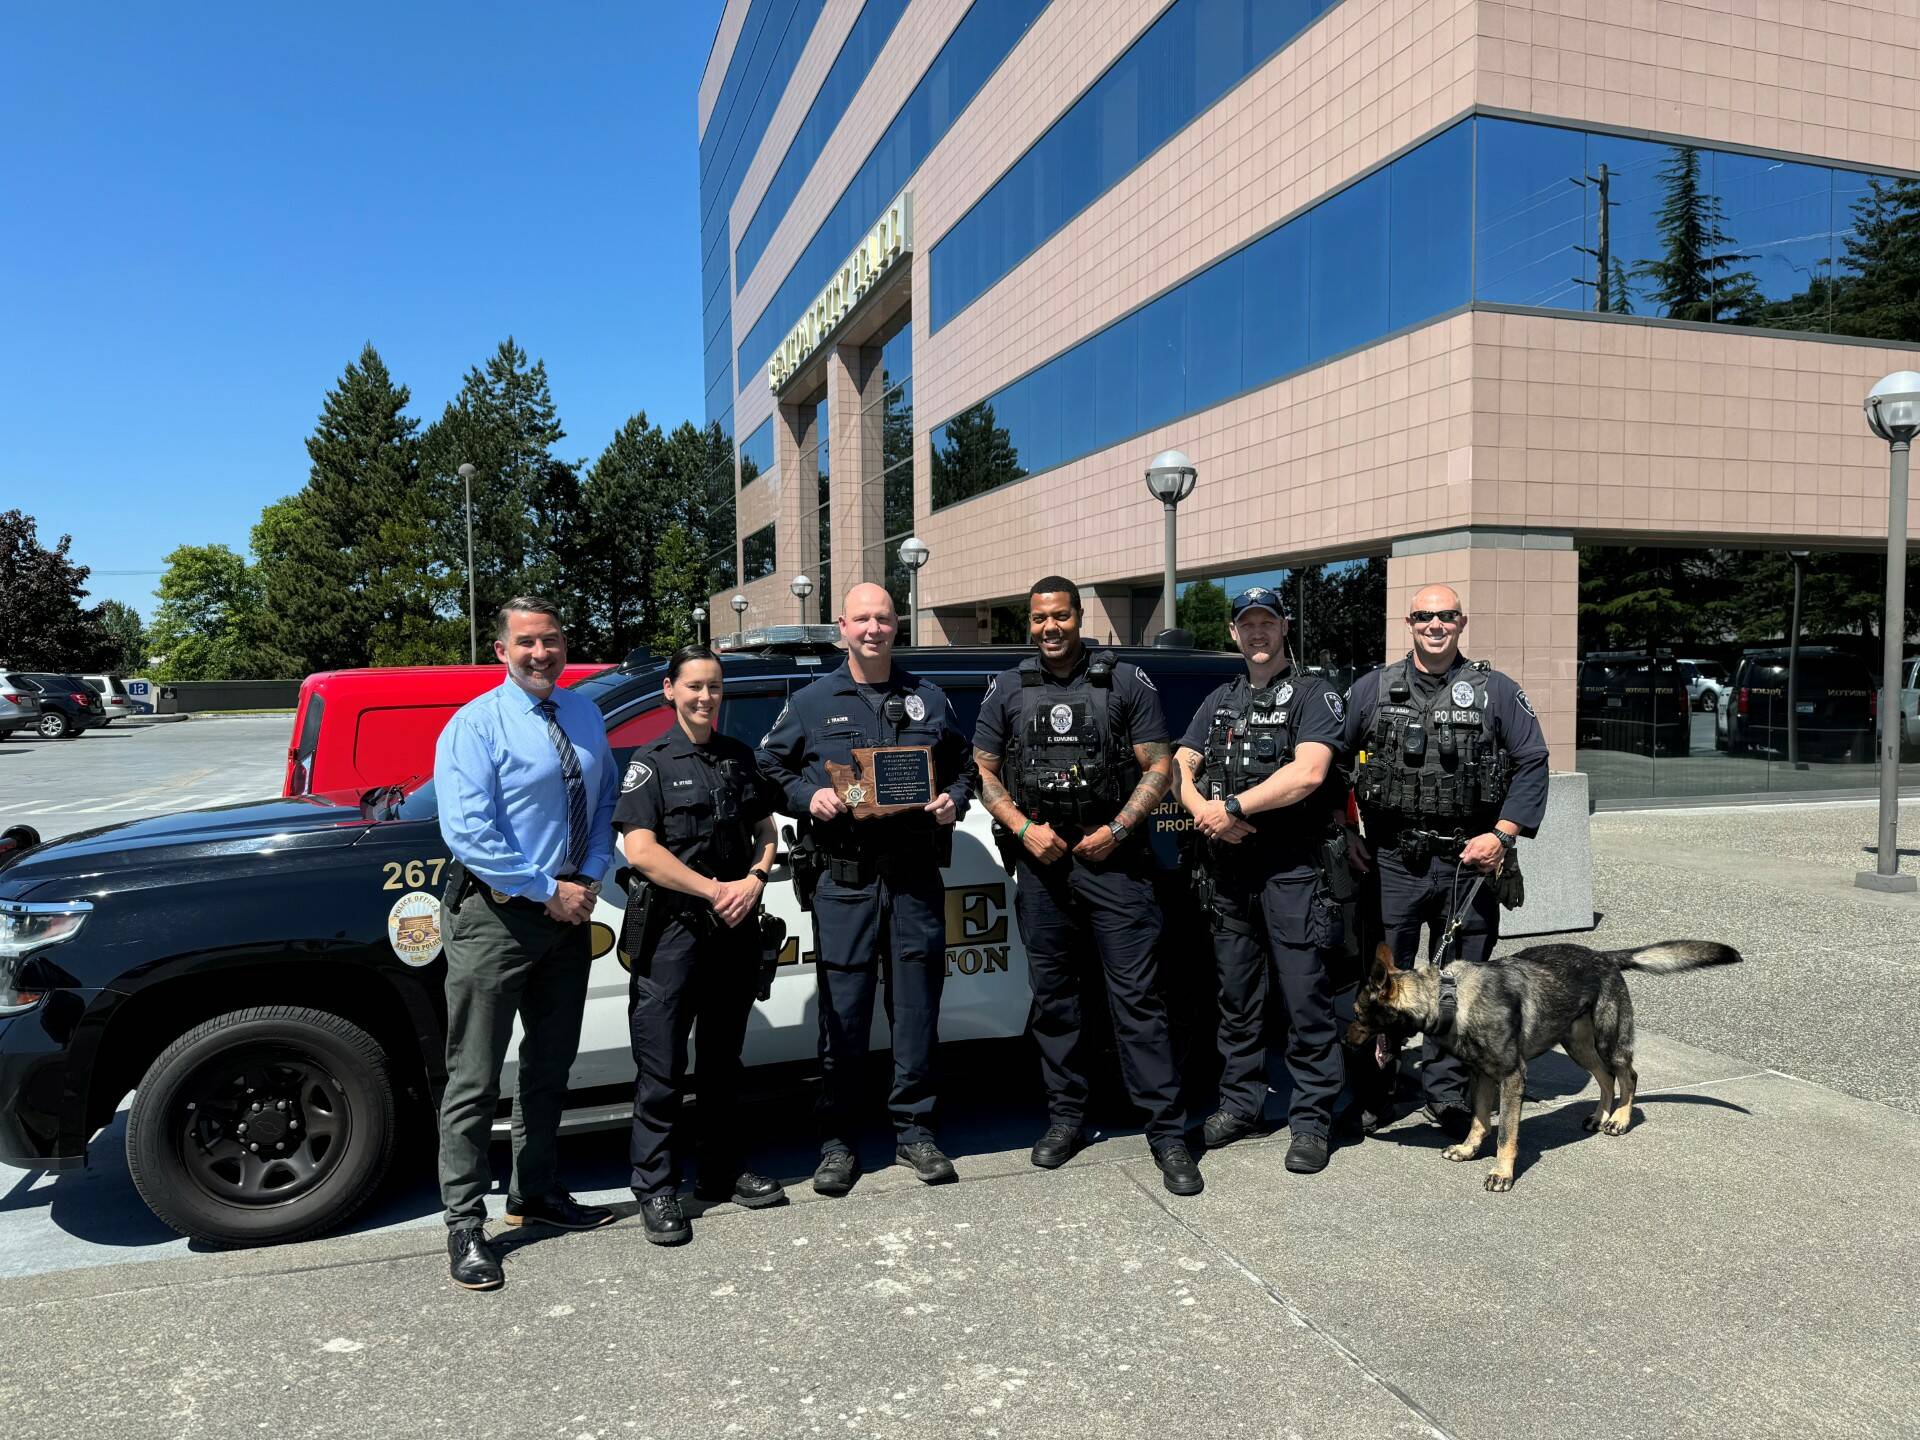 Deputy Chief R. Rutledge with Officer R. Hynes, Sgt. J. Trader (holding accreditation award), Officer E. Edmunds, Officer K. Petty, and K9 Officer D. Adam with K9 Xander. Photo Courtesy of Renton Police Department